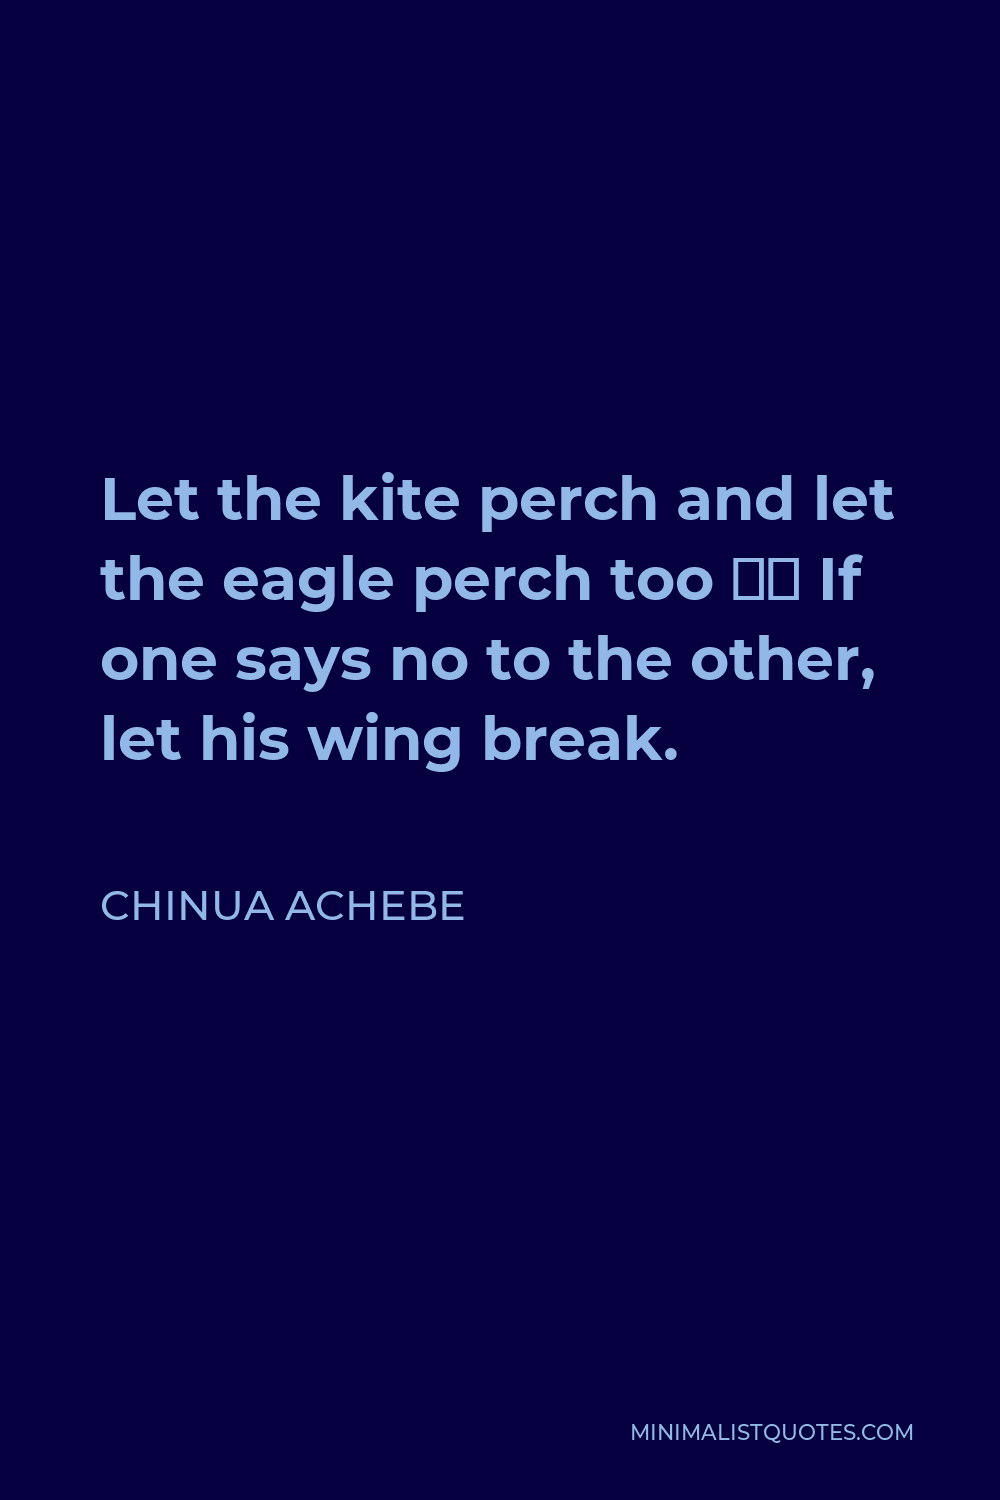 Chinua Achebe Quote - Let the kite perch and let the eagle perch too – If one says no to the other, let his wing break.